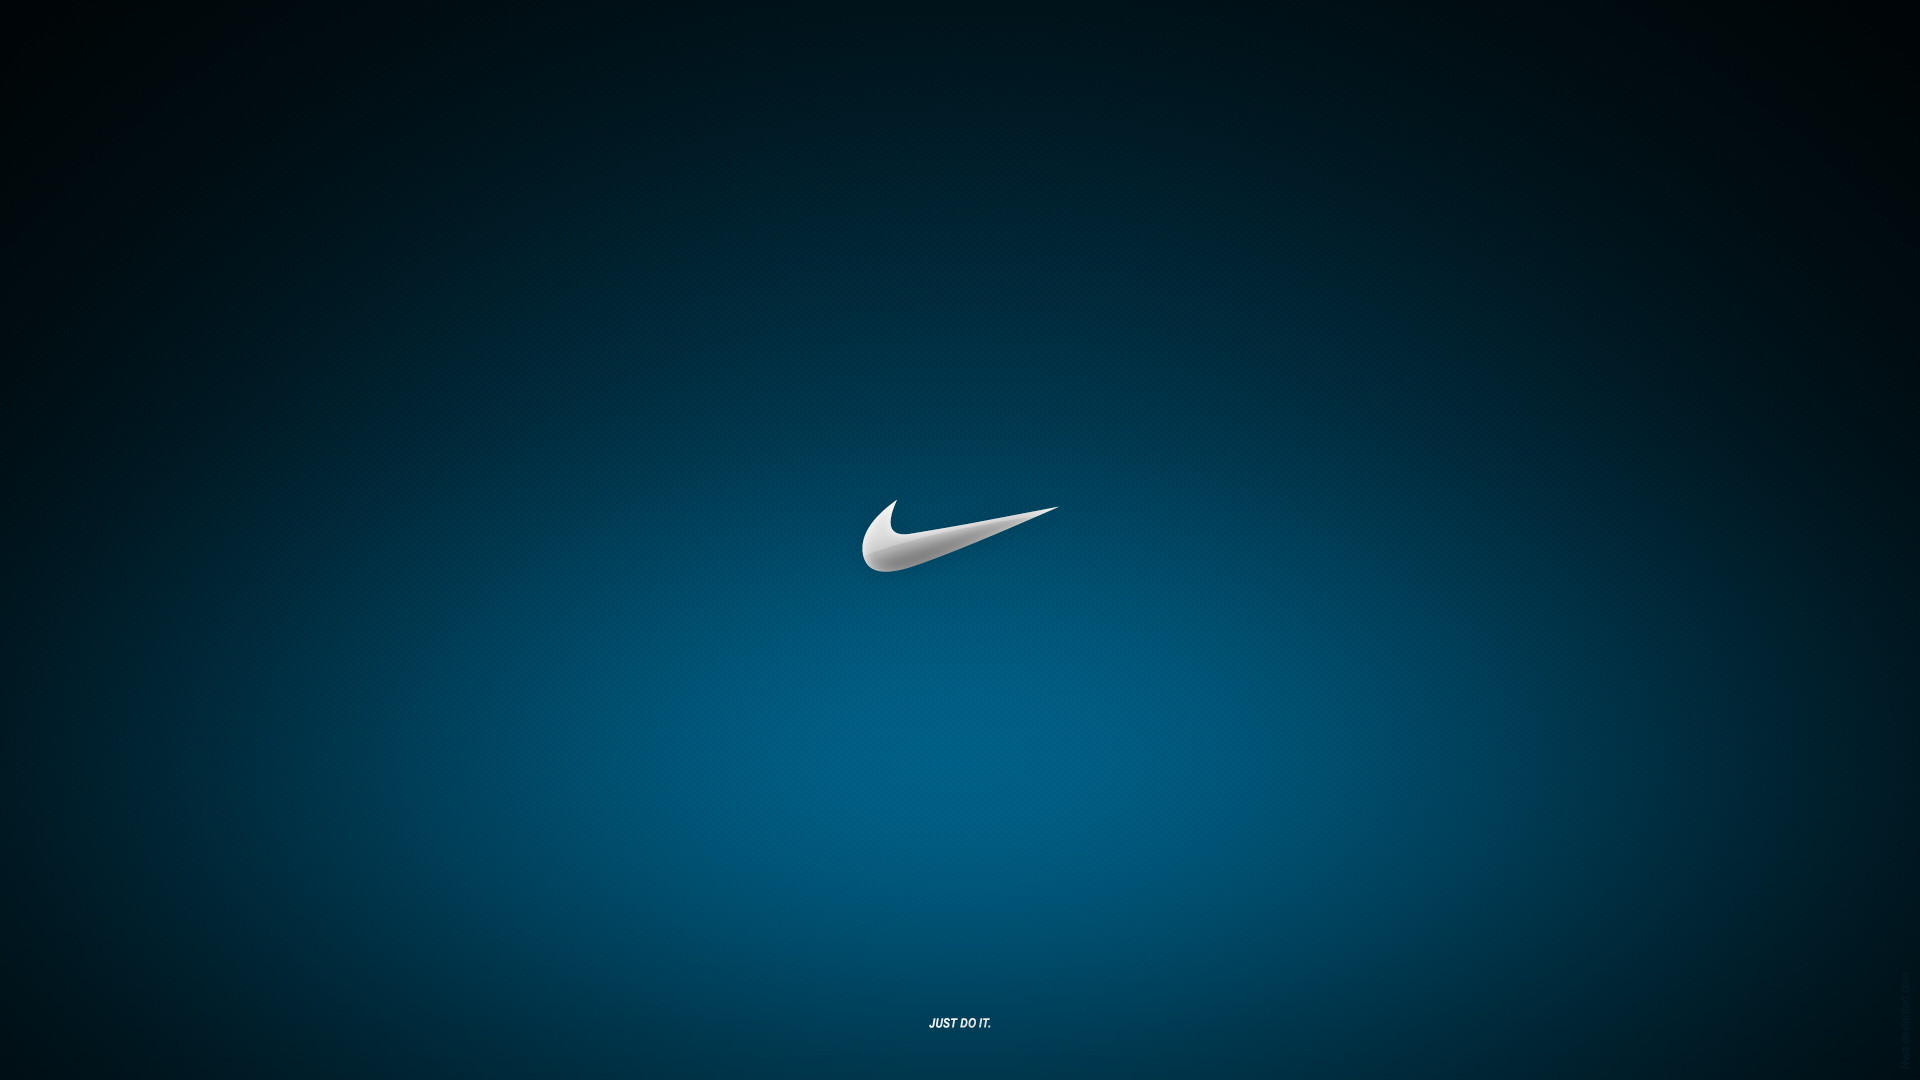 1920x1080 Nike Logo Blue HD Wallpapers for iPhone is a fantastic HD